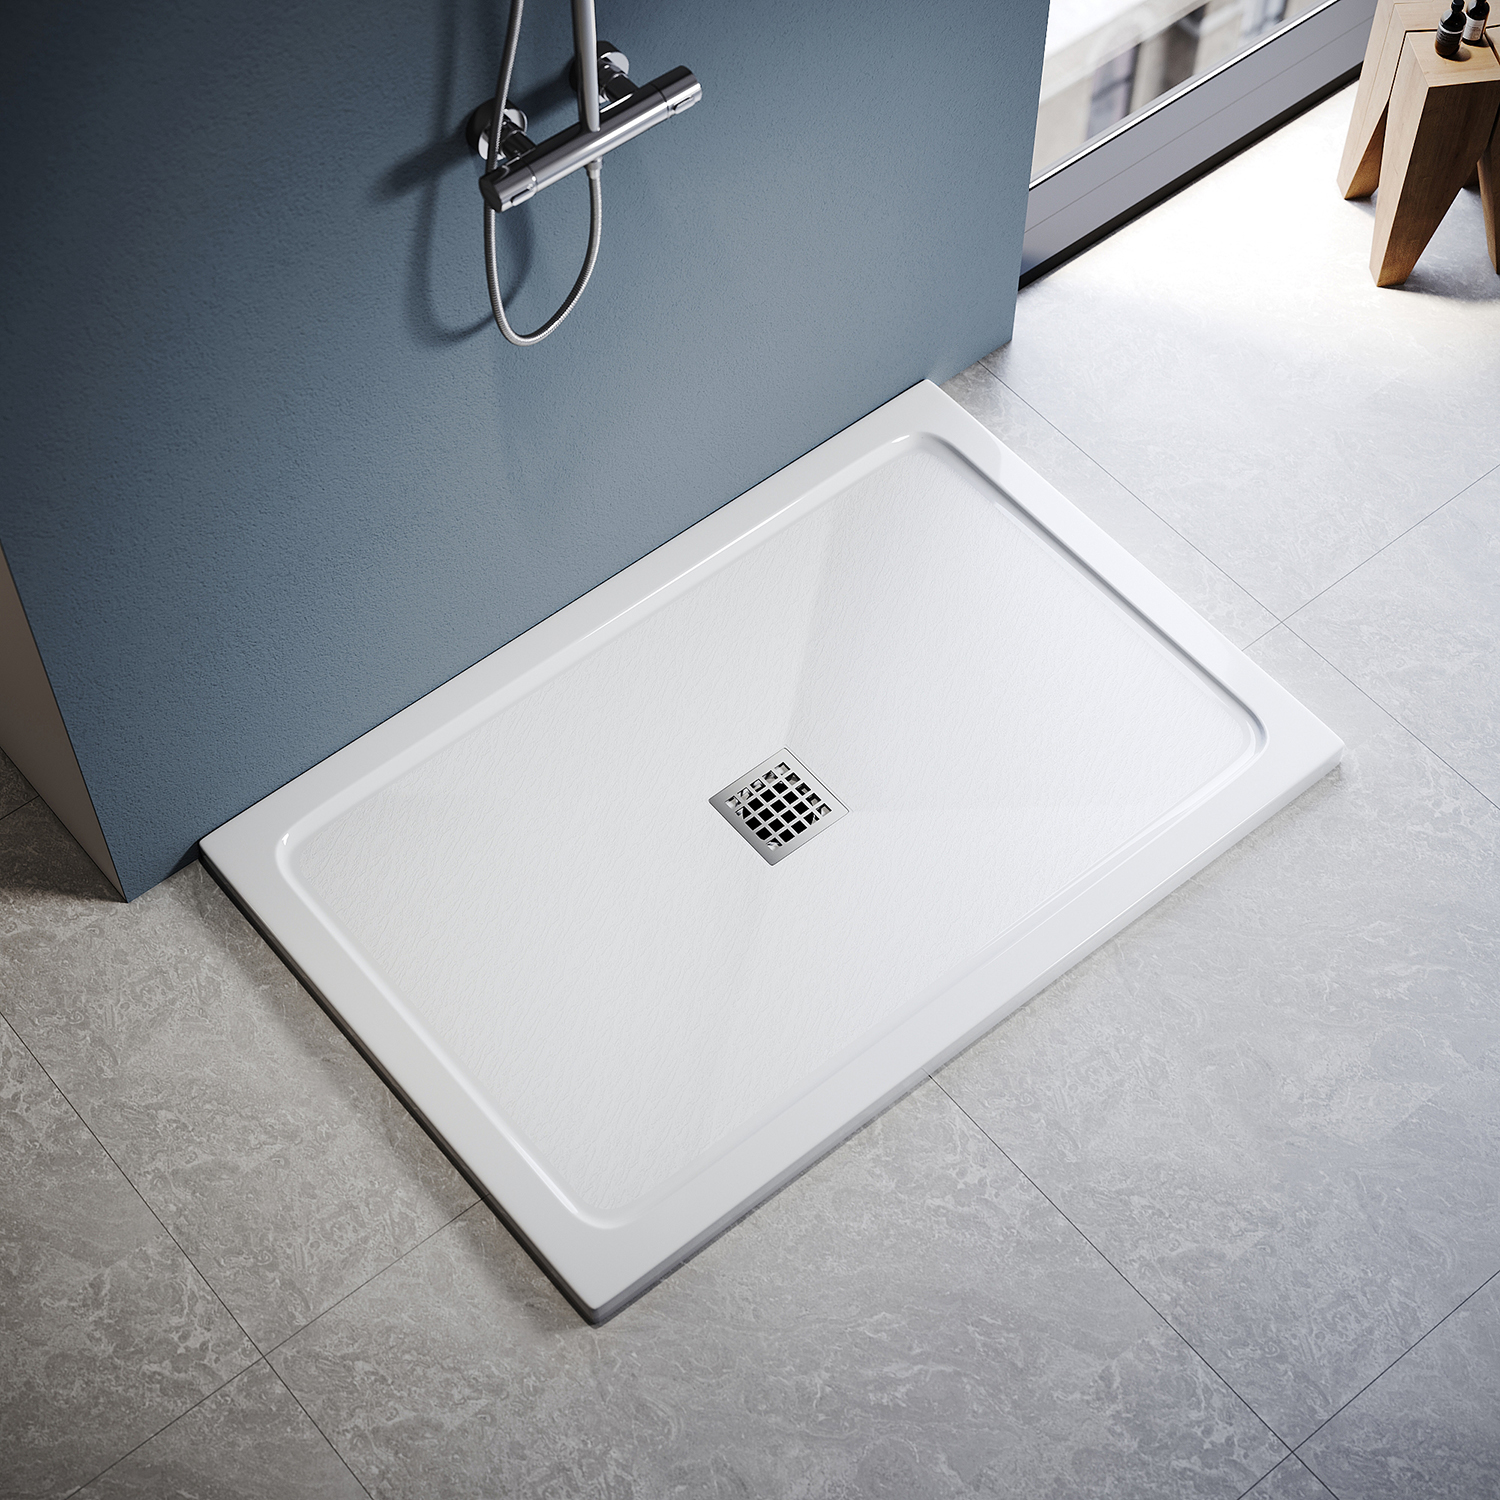 SMC Shower Tray Features：